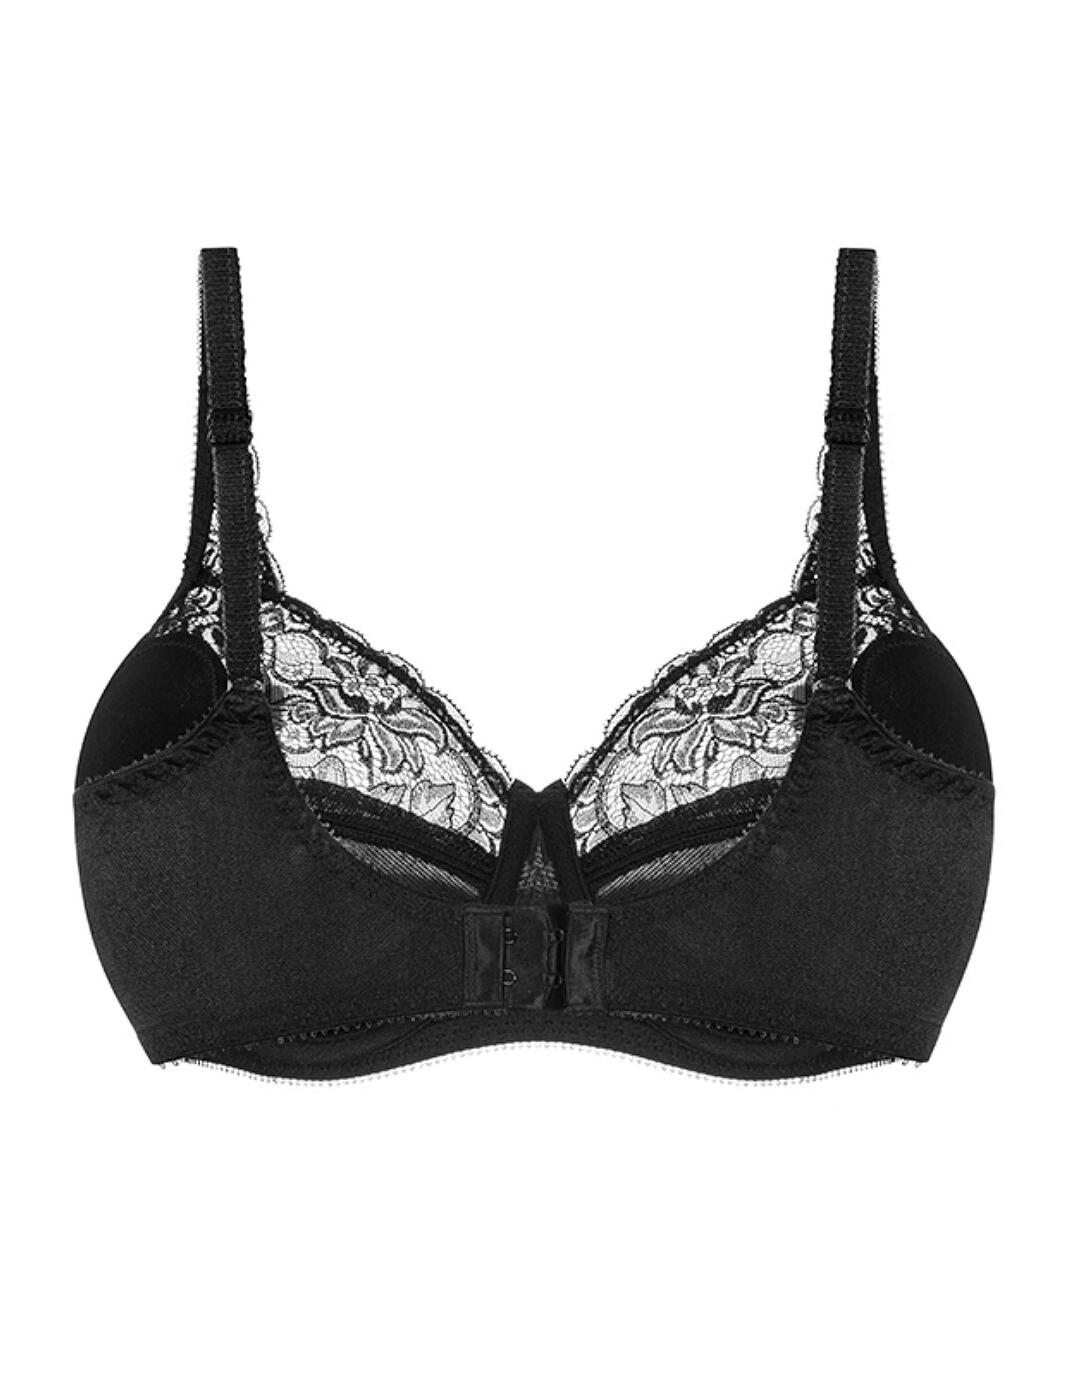 Charnos Superfit Full Cup Underwired Bra - Belle Lingerie